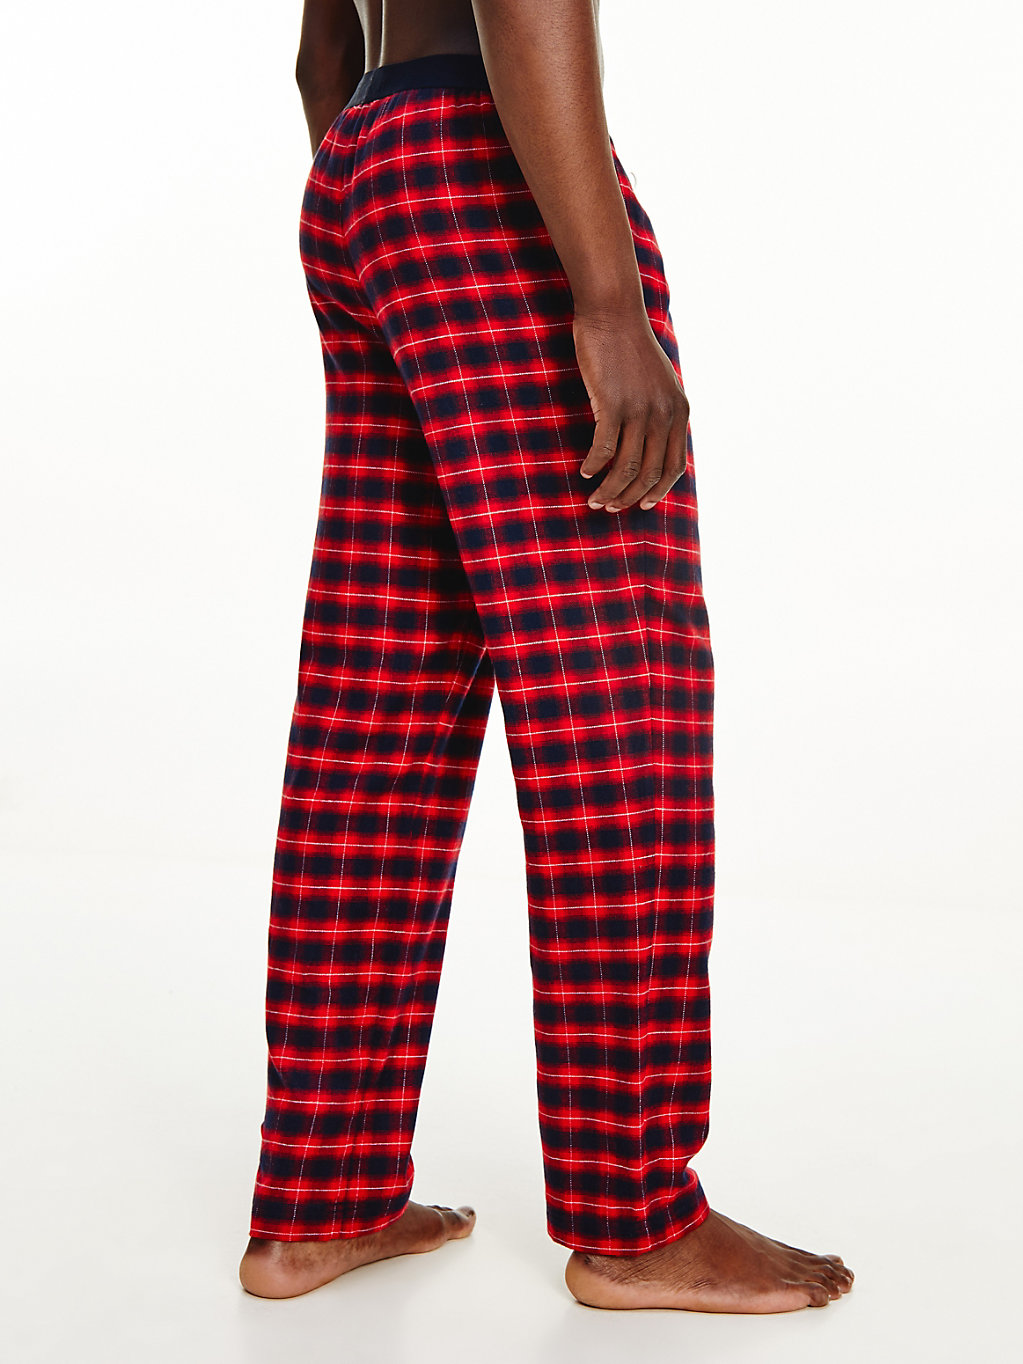 TOMMY HILFIGER FLANNEL PANTS | Morans Menswear and Clothing, Thurles, Co.  Tipperary